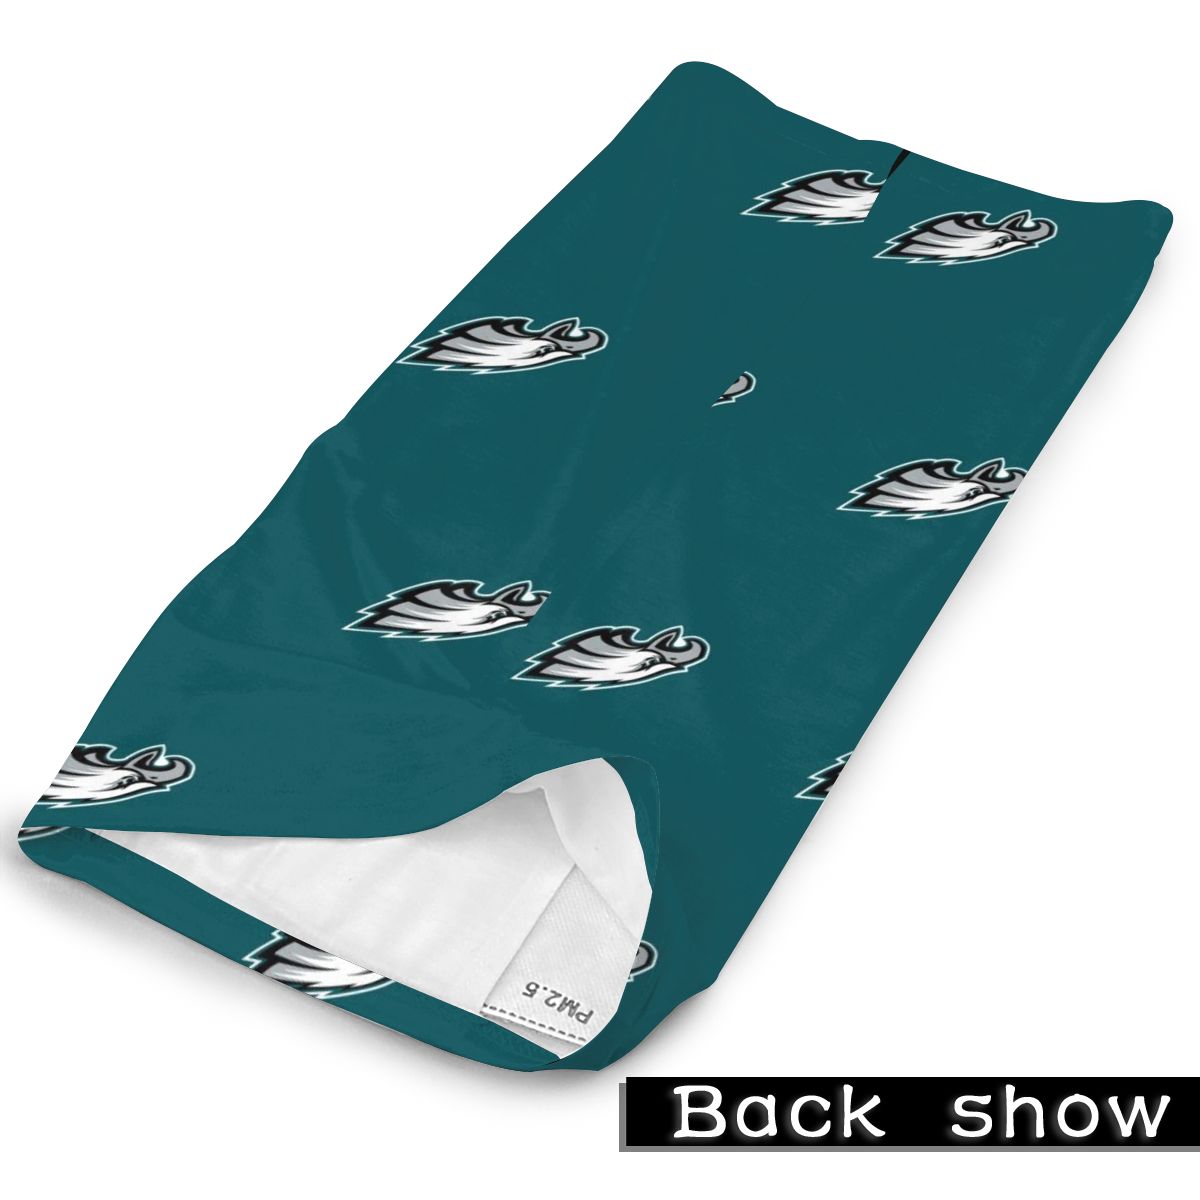 Reusble Mouth Cover Bandanas Philadelphia Eagles Variety Head Scarf Face Mask With PM 2.5 Filter